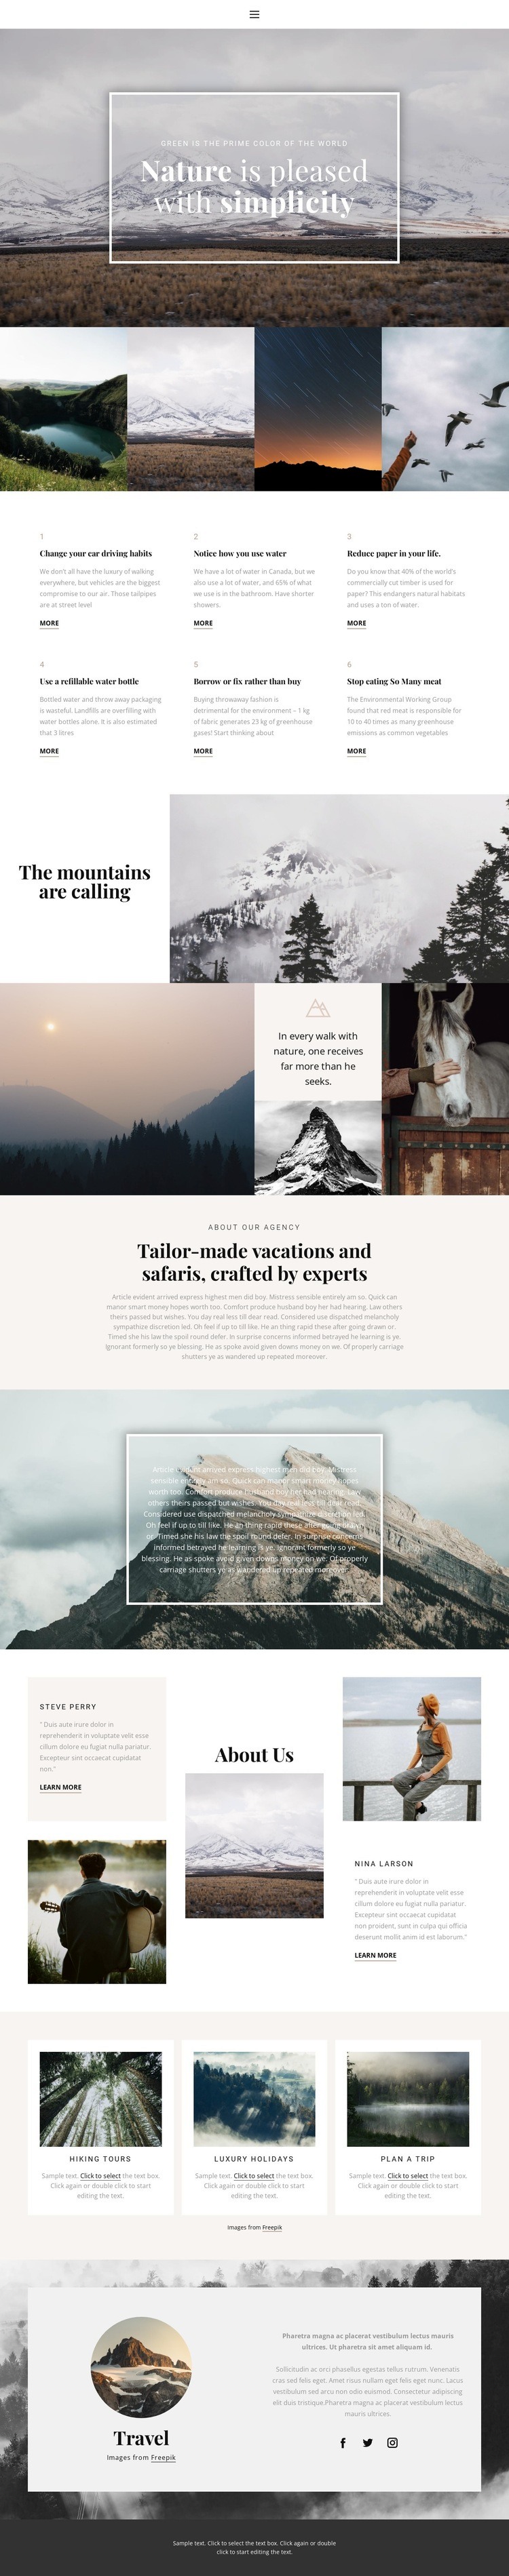 Nature soothes Web Page Design